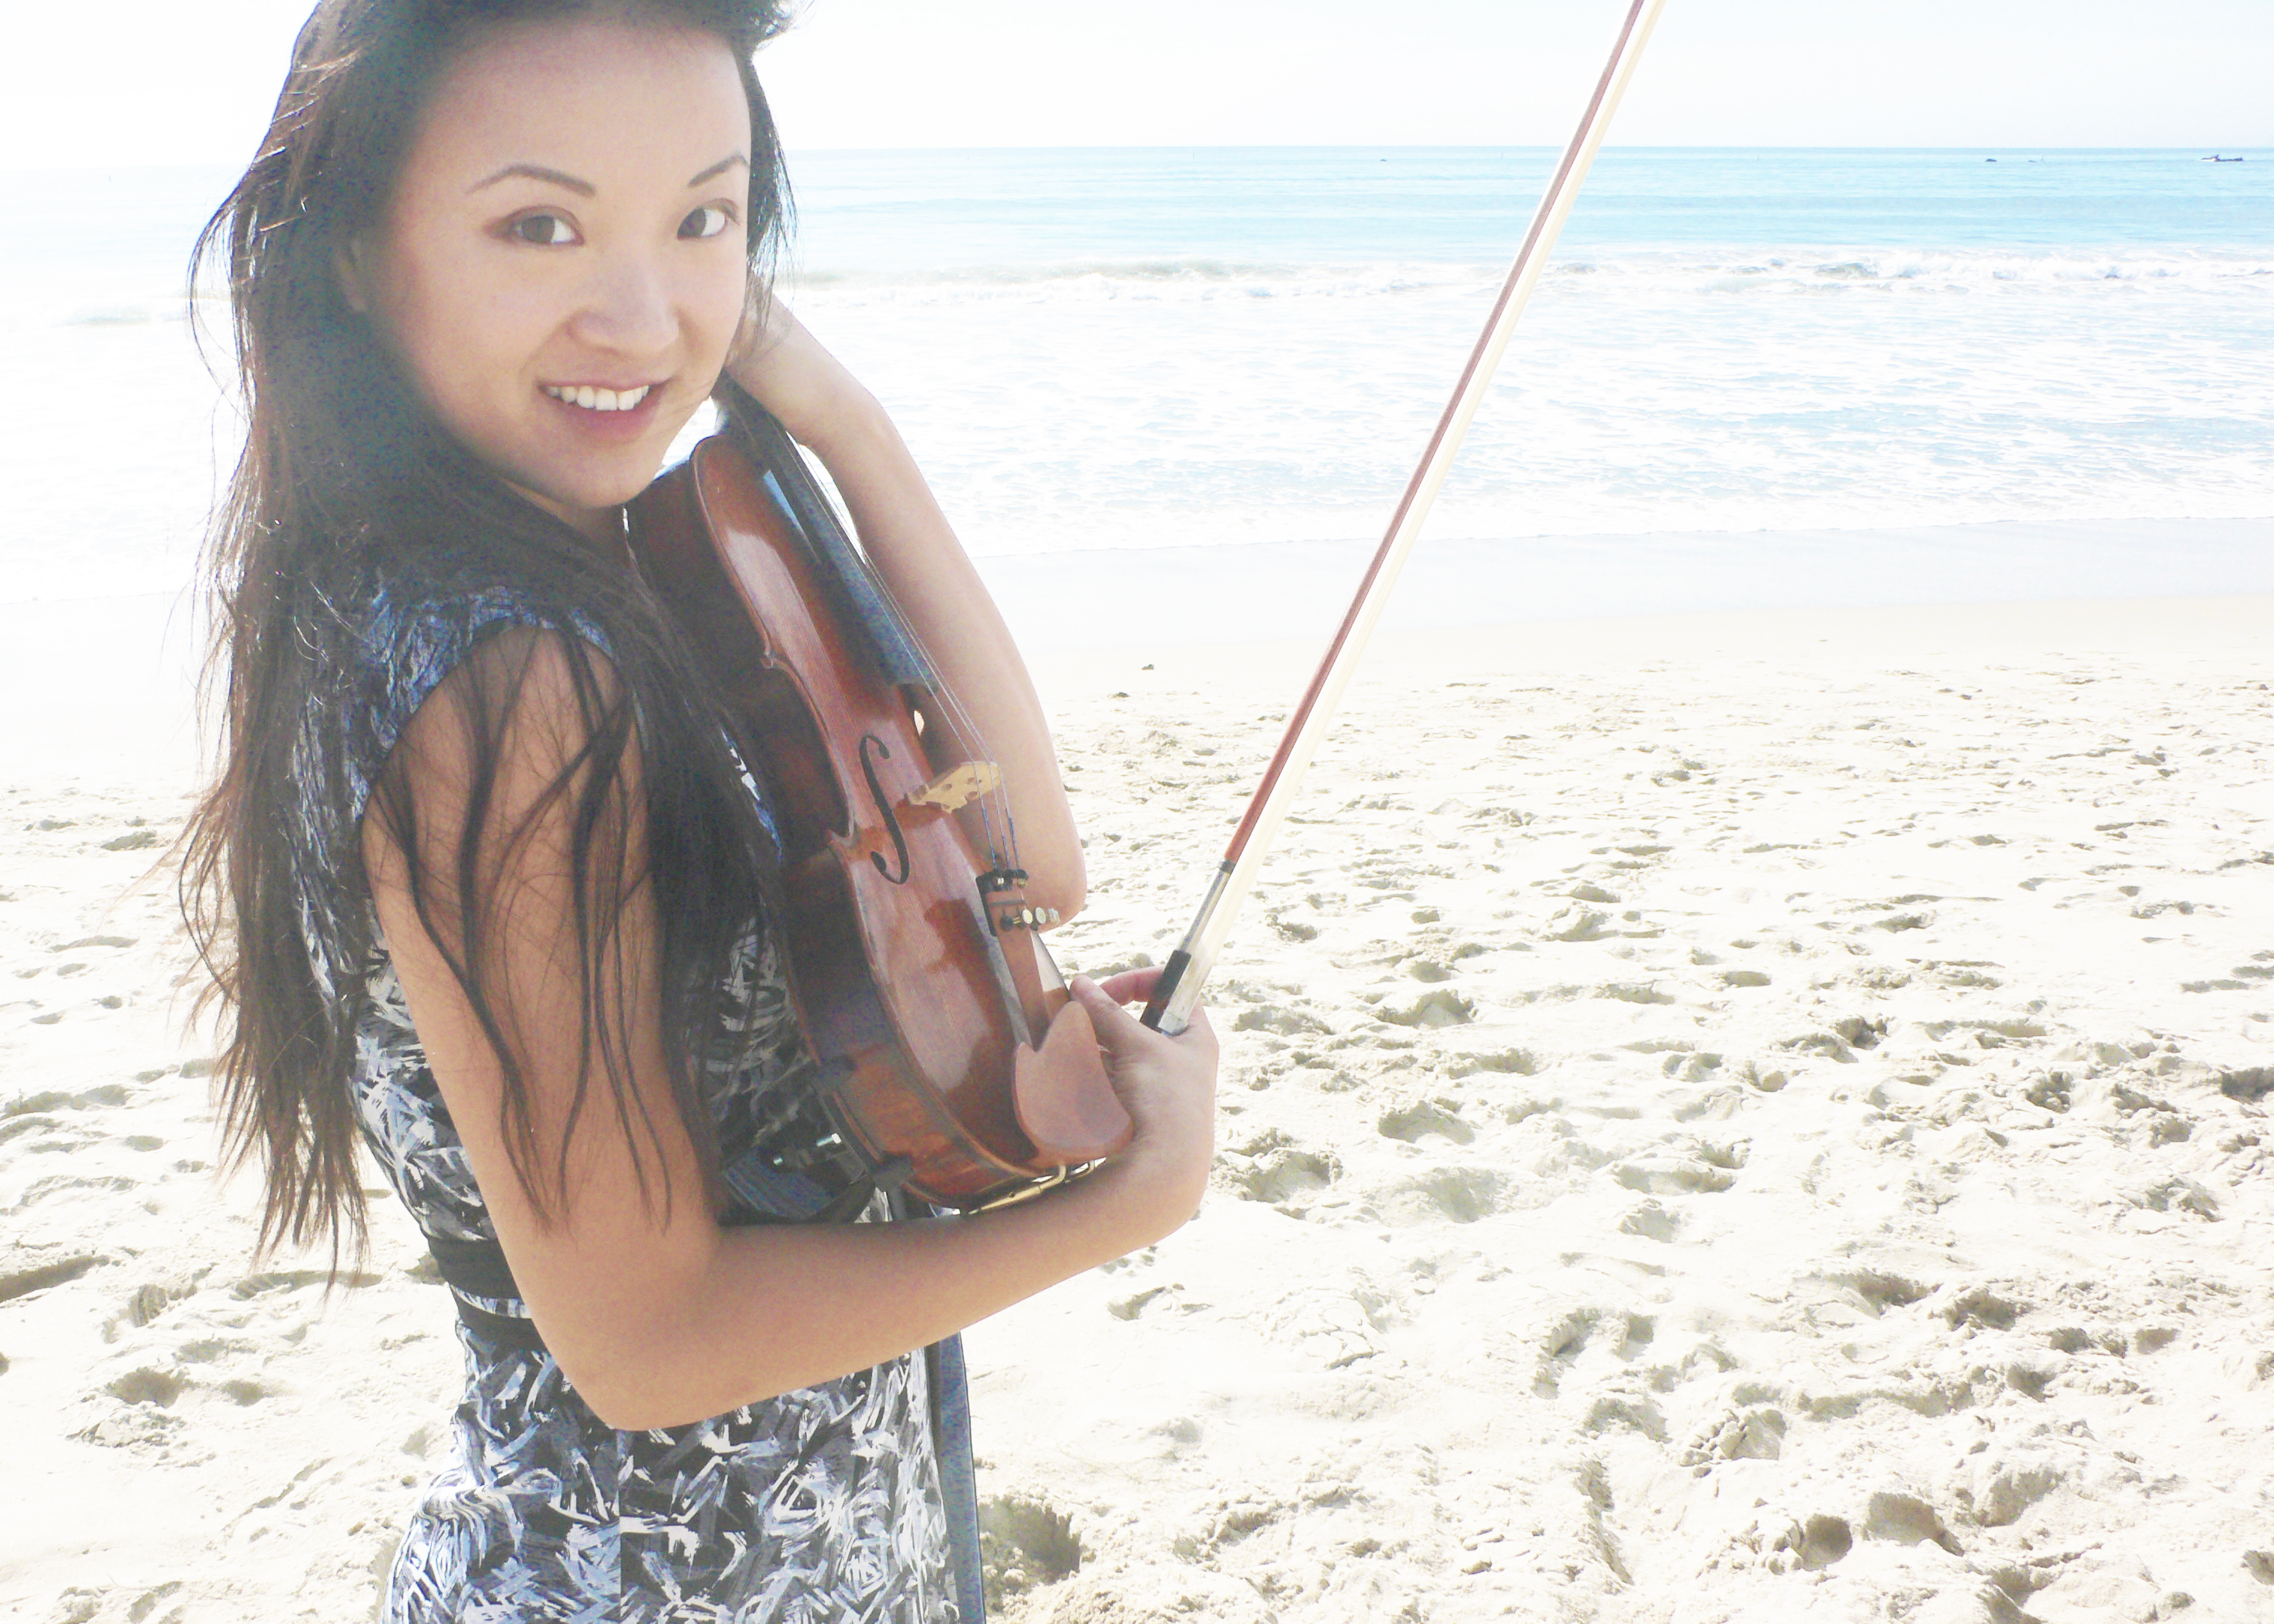 Lily holding a violin, cropped